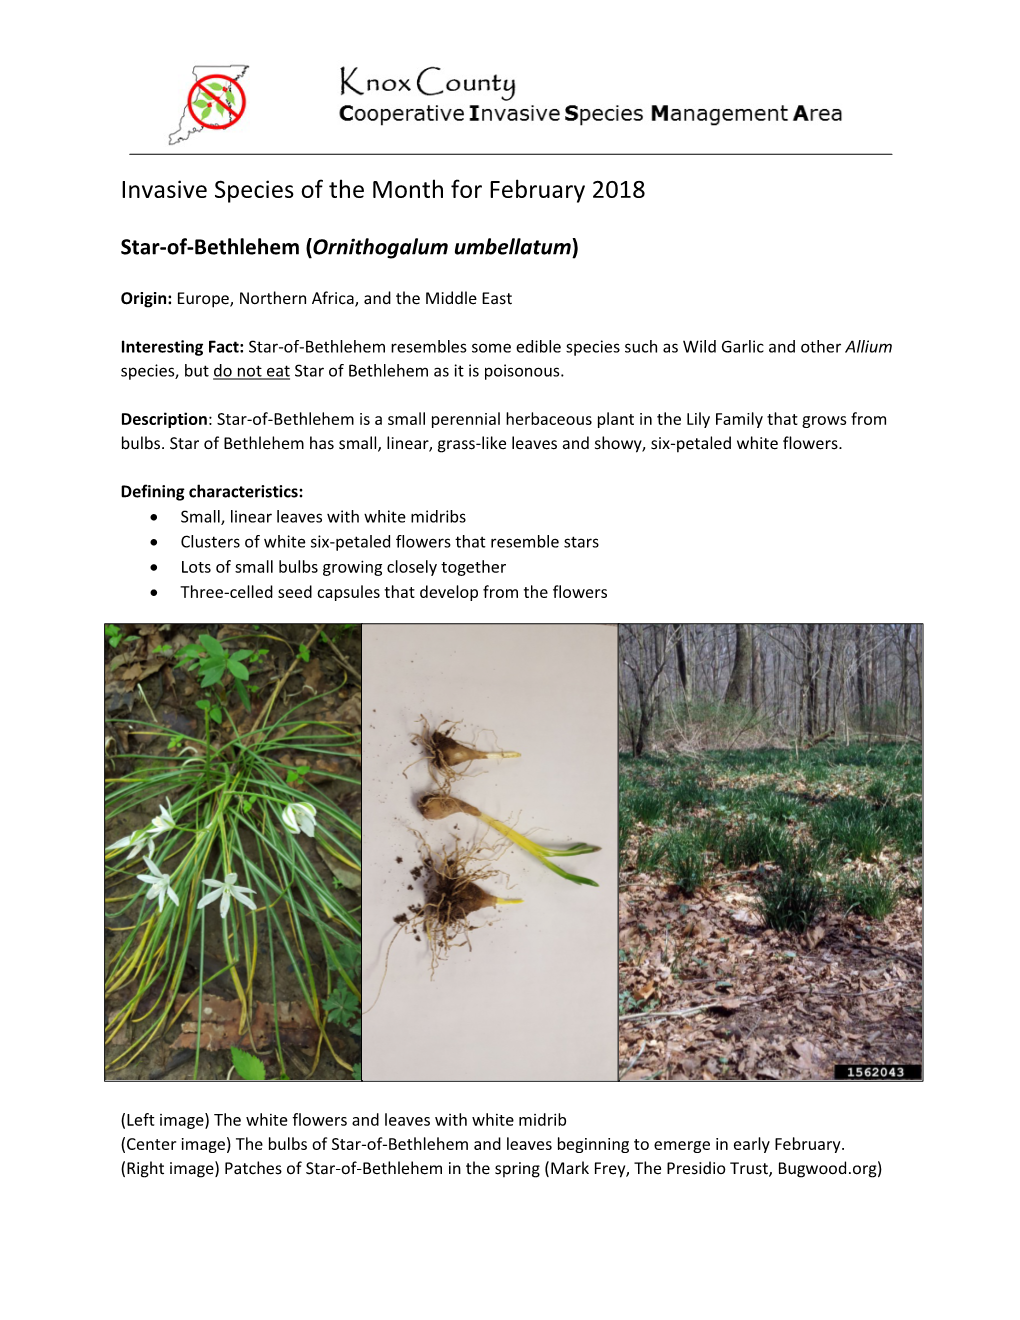 Invasive Species of the Month for February 2018